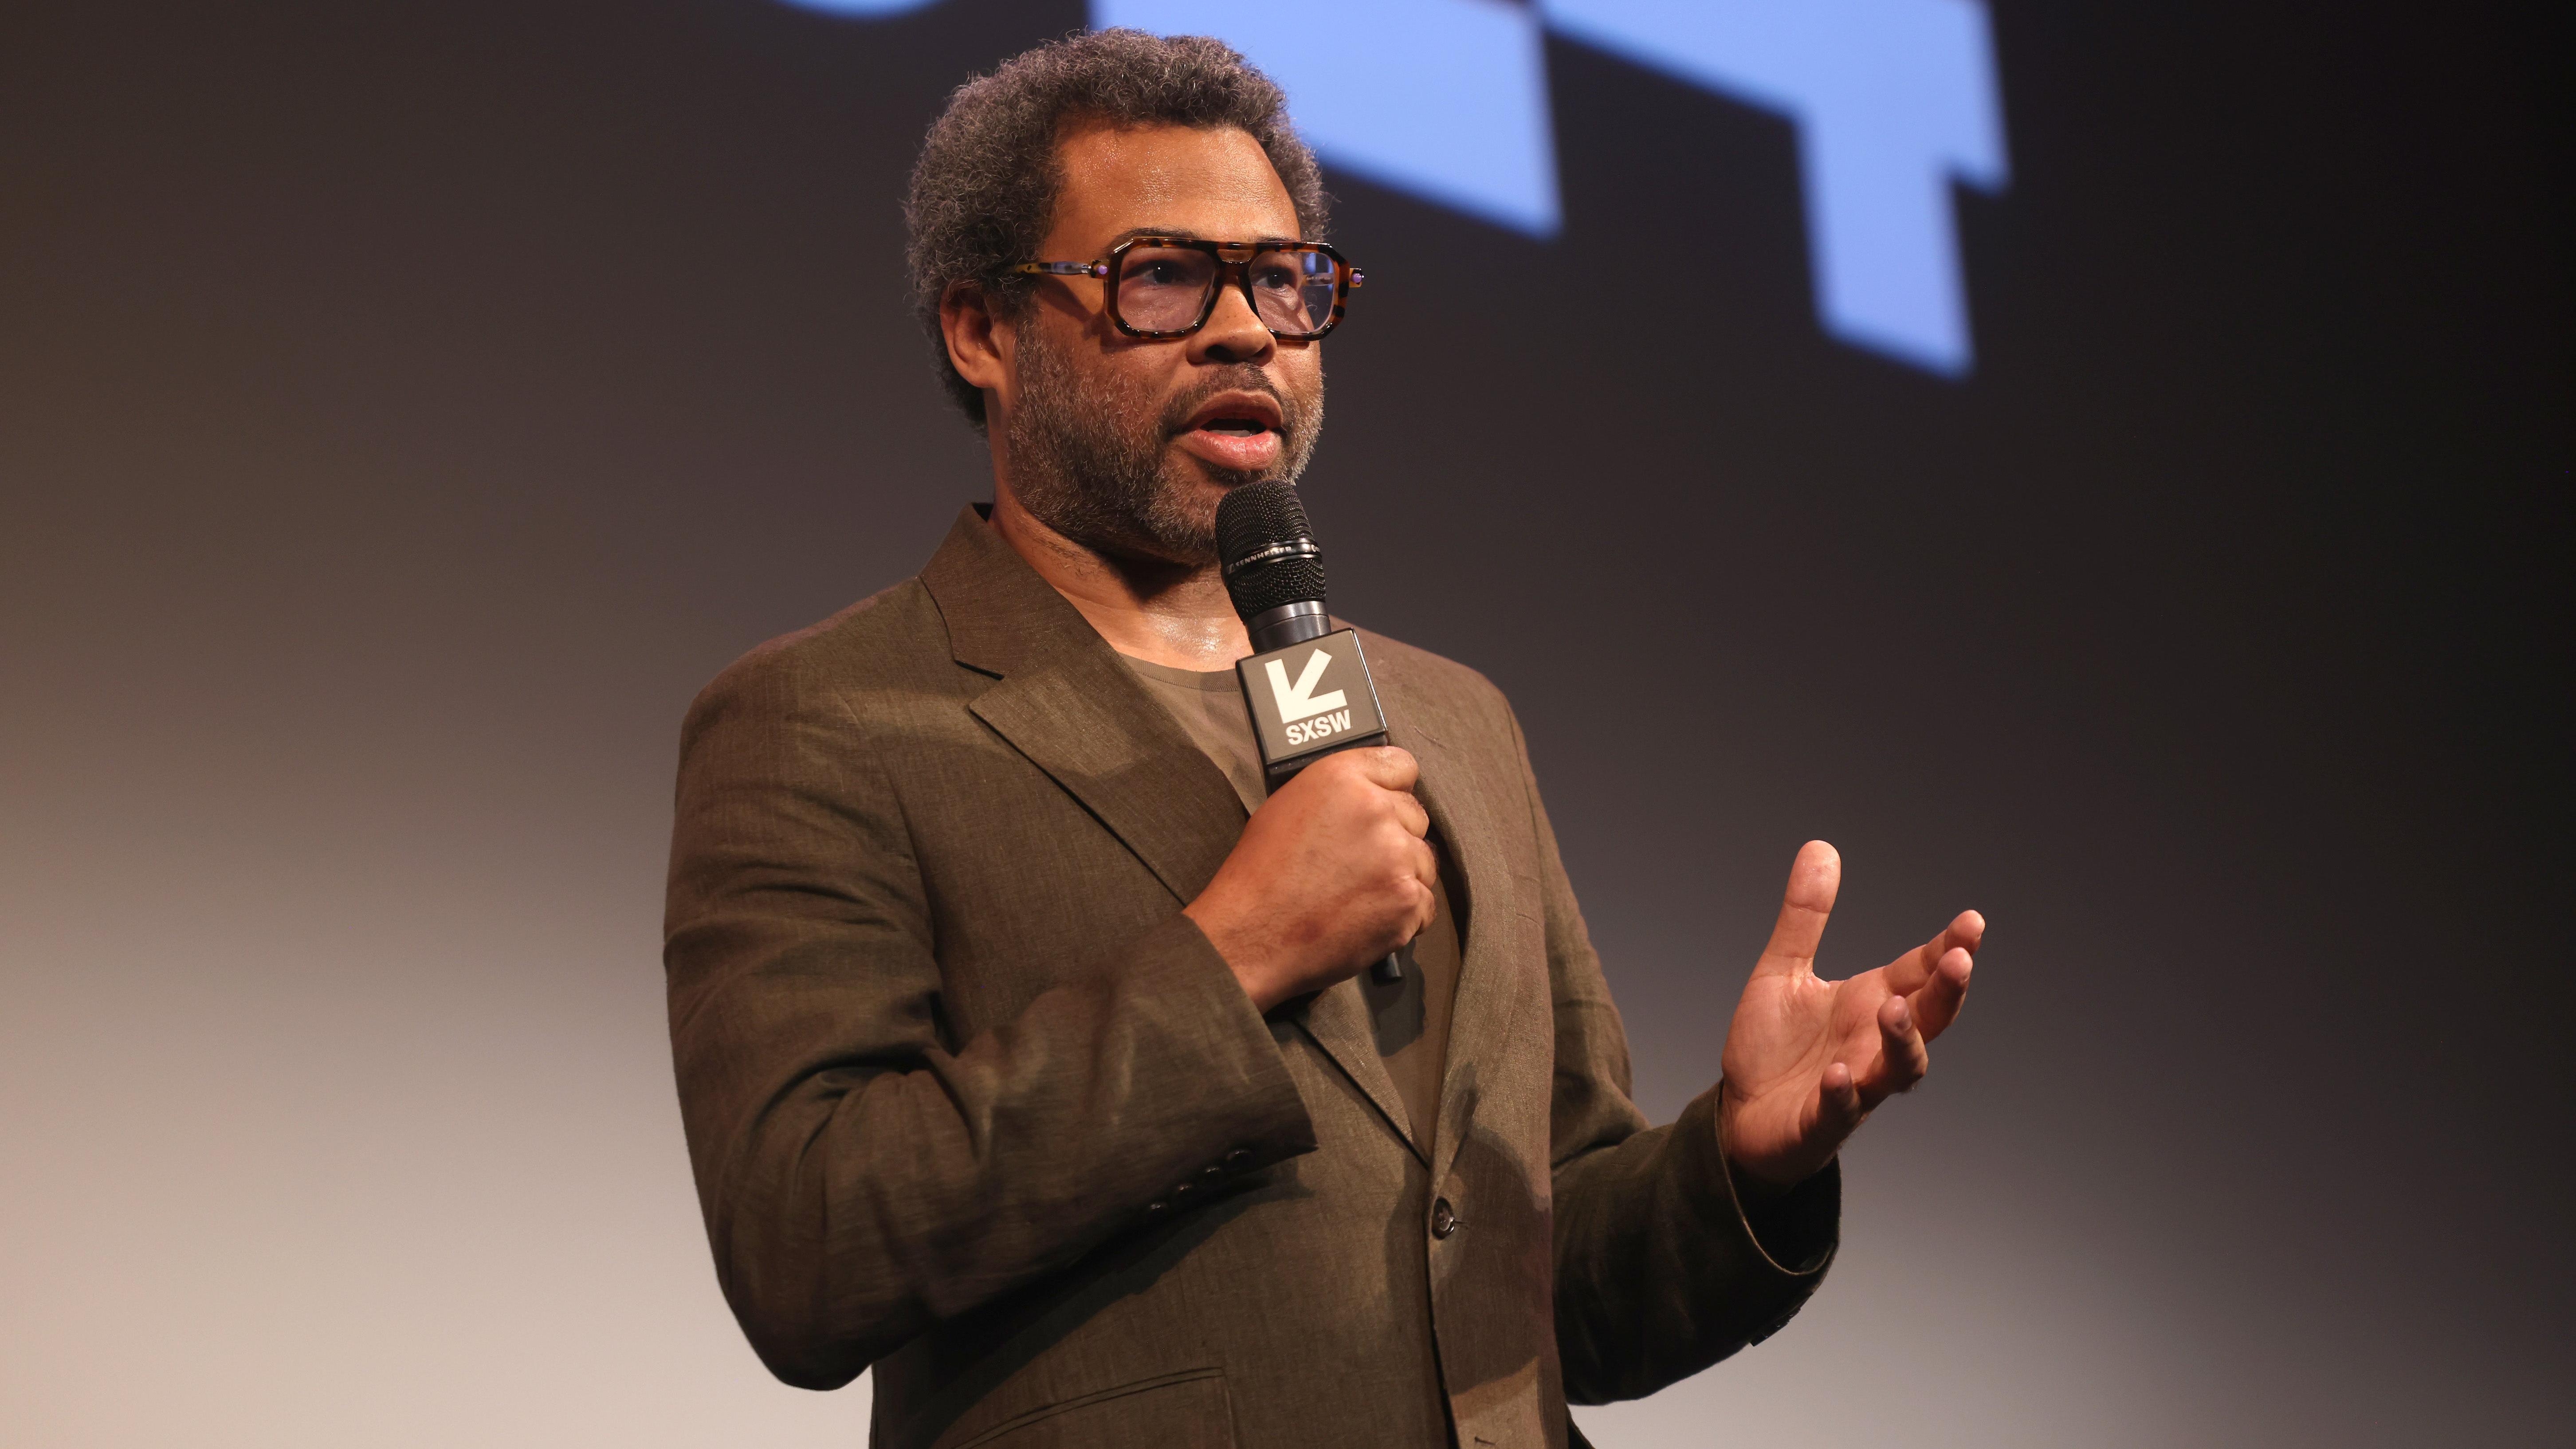 We’re going to have to wait a while for Jordan Peele’s next movie